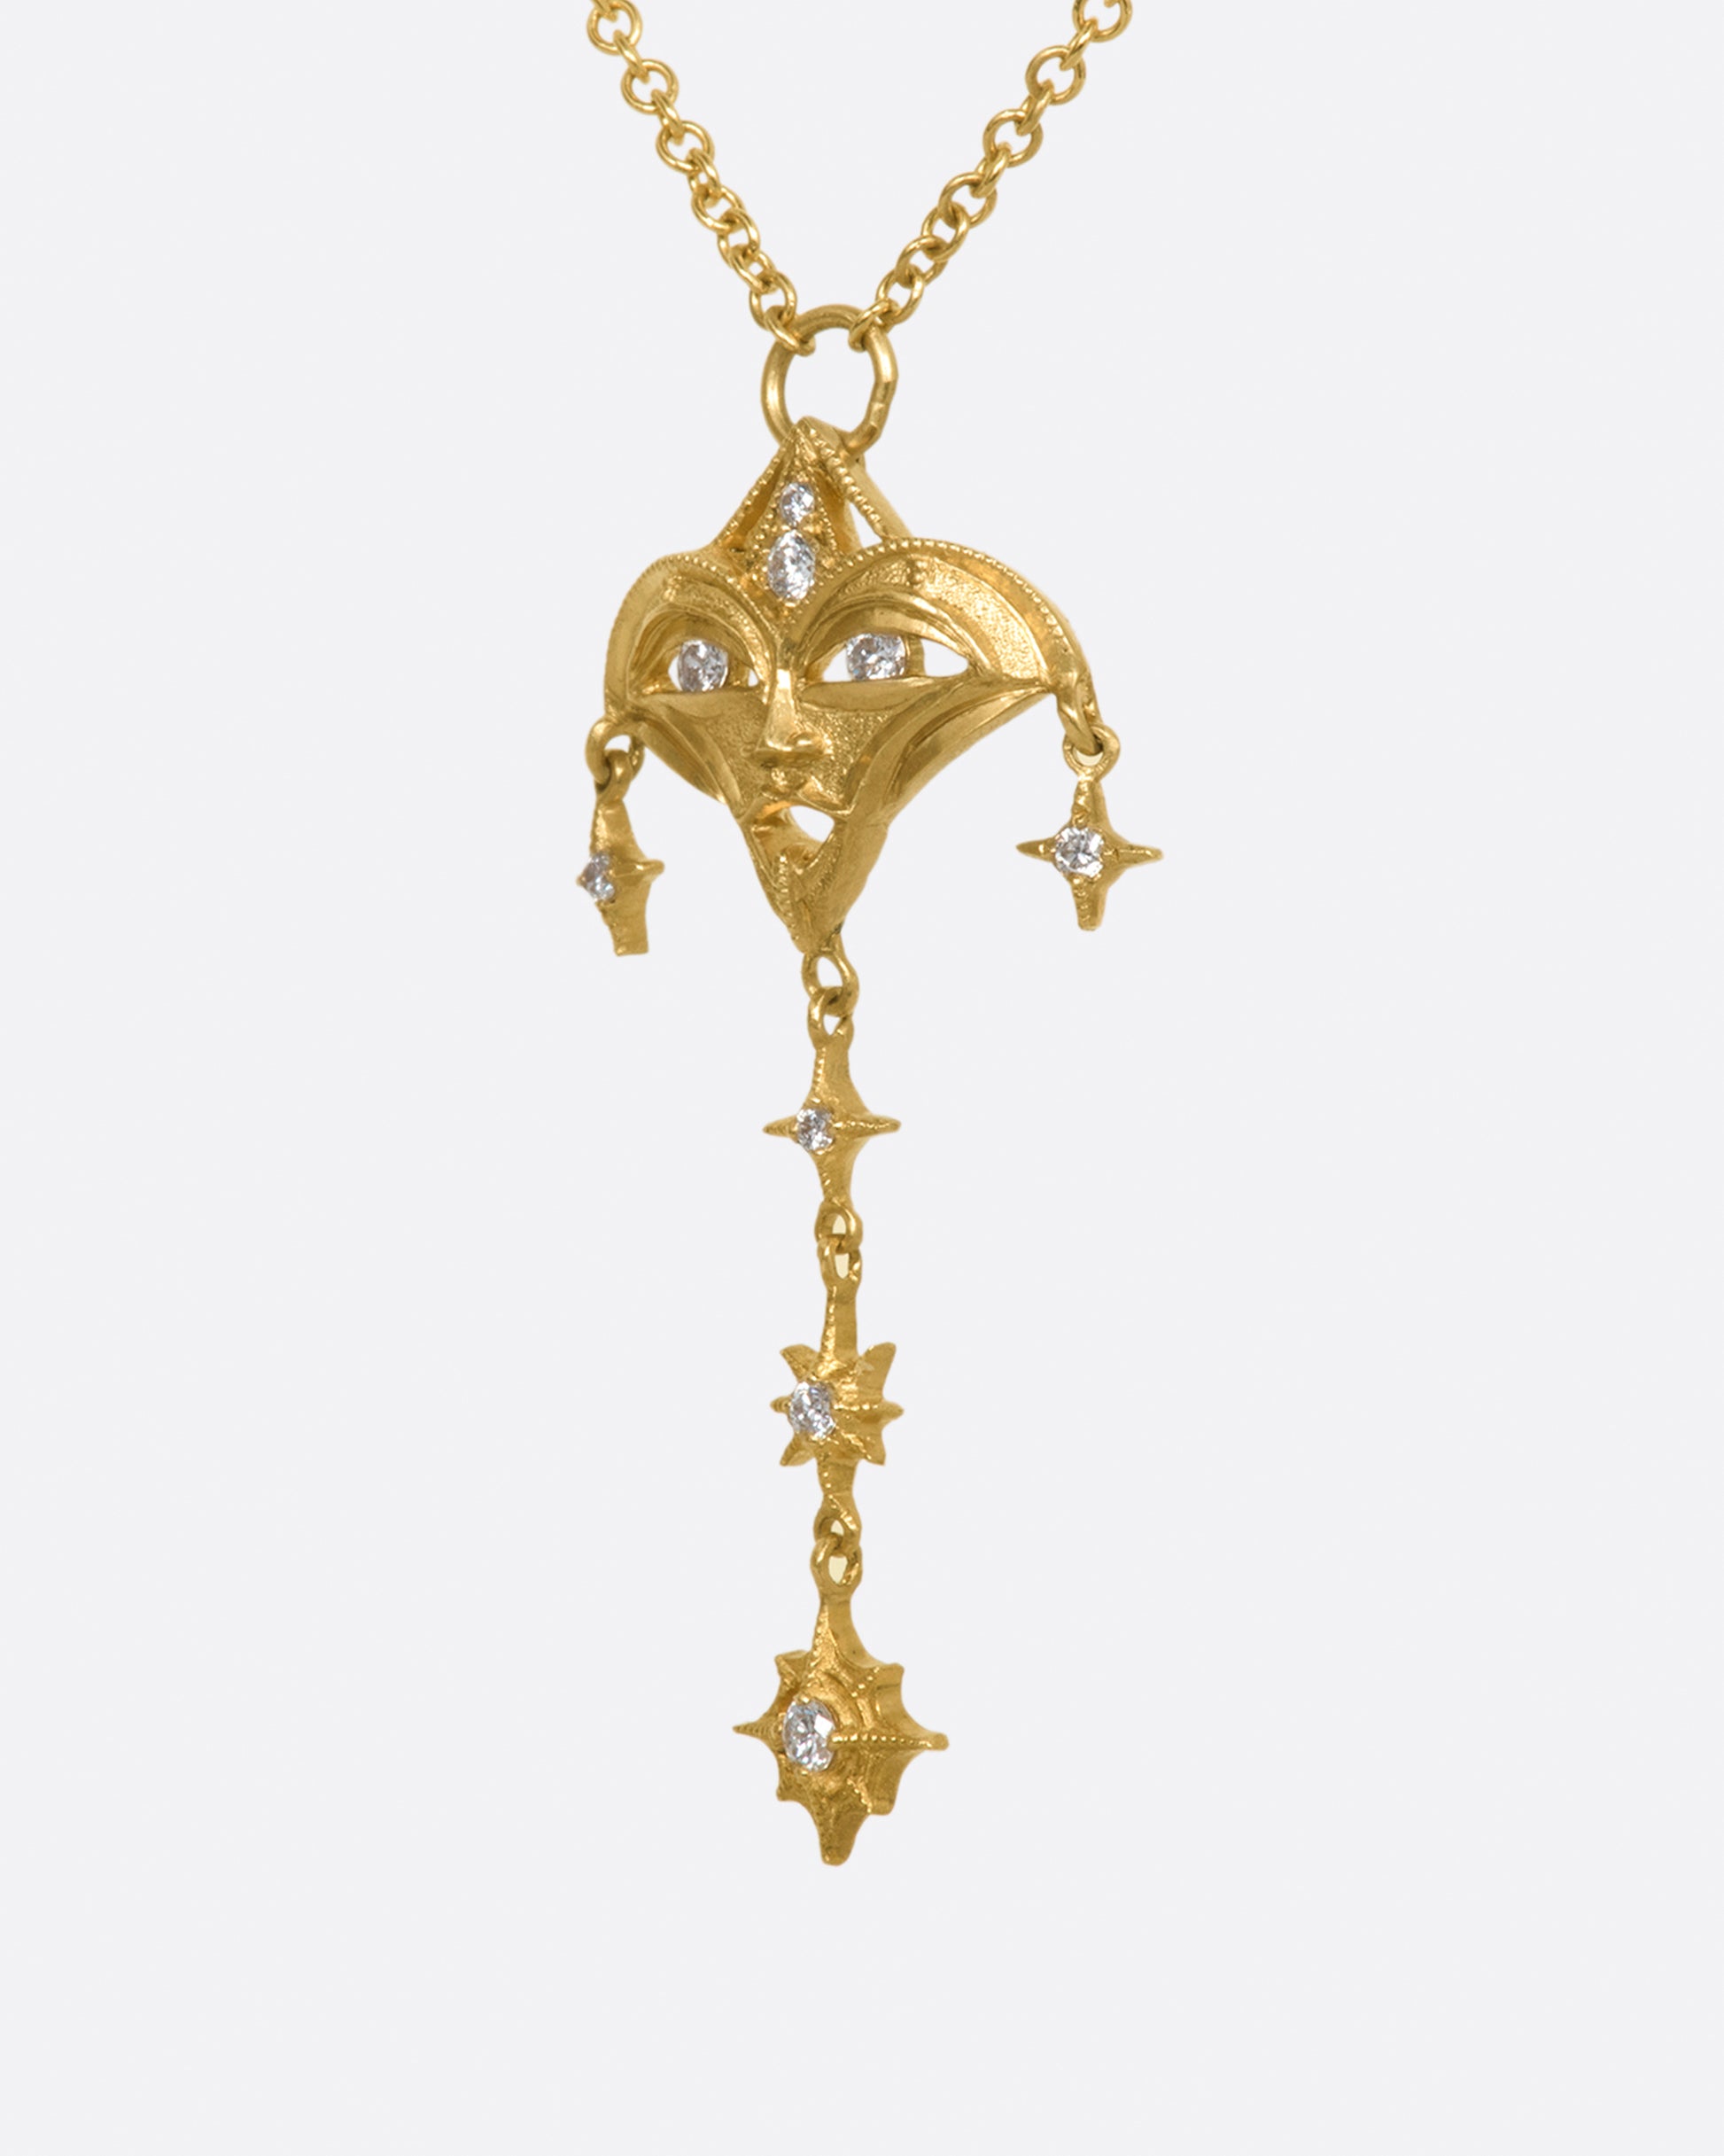 A yellow gold necklace with a mask pendant with diamond eyes and various star dangles, shown from the side.